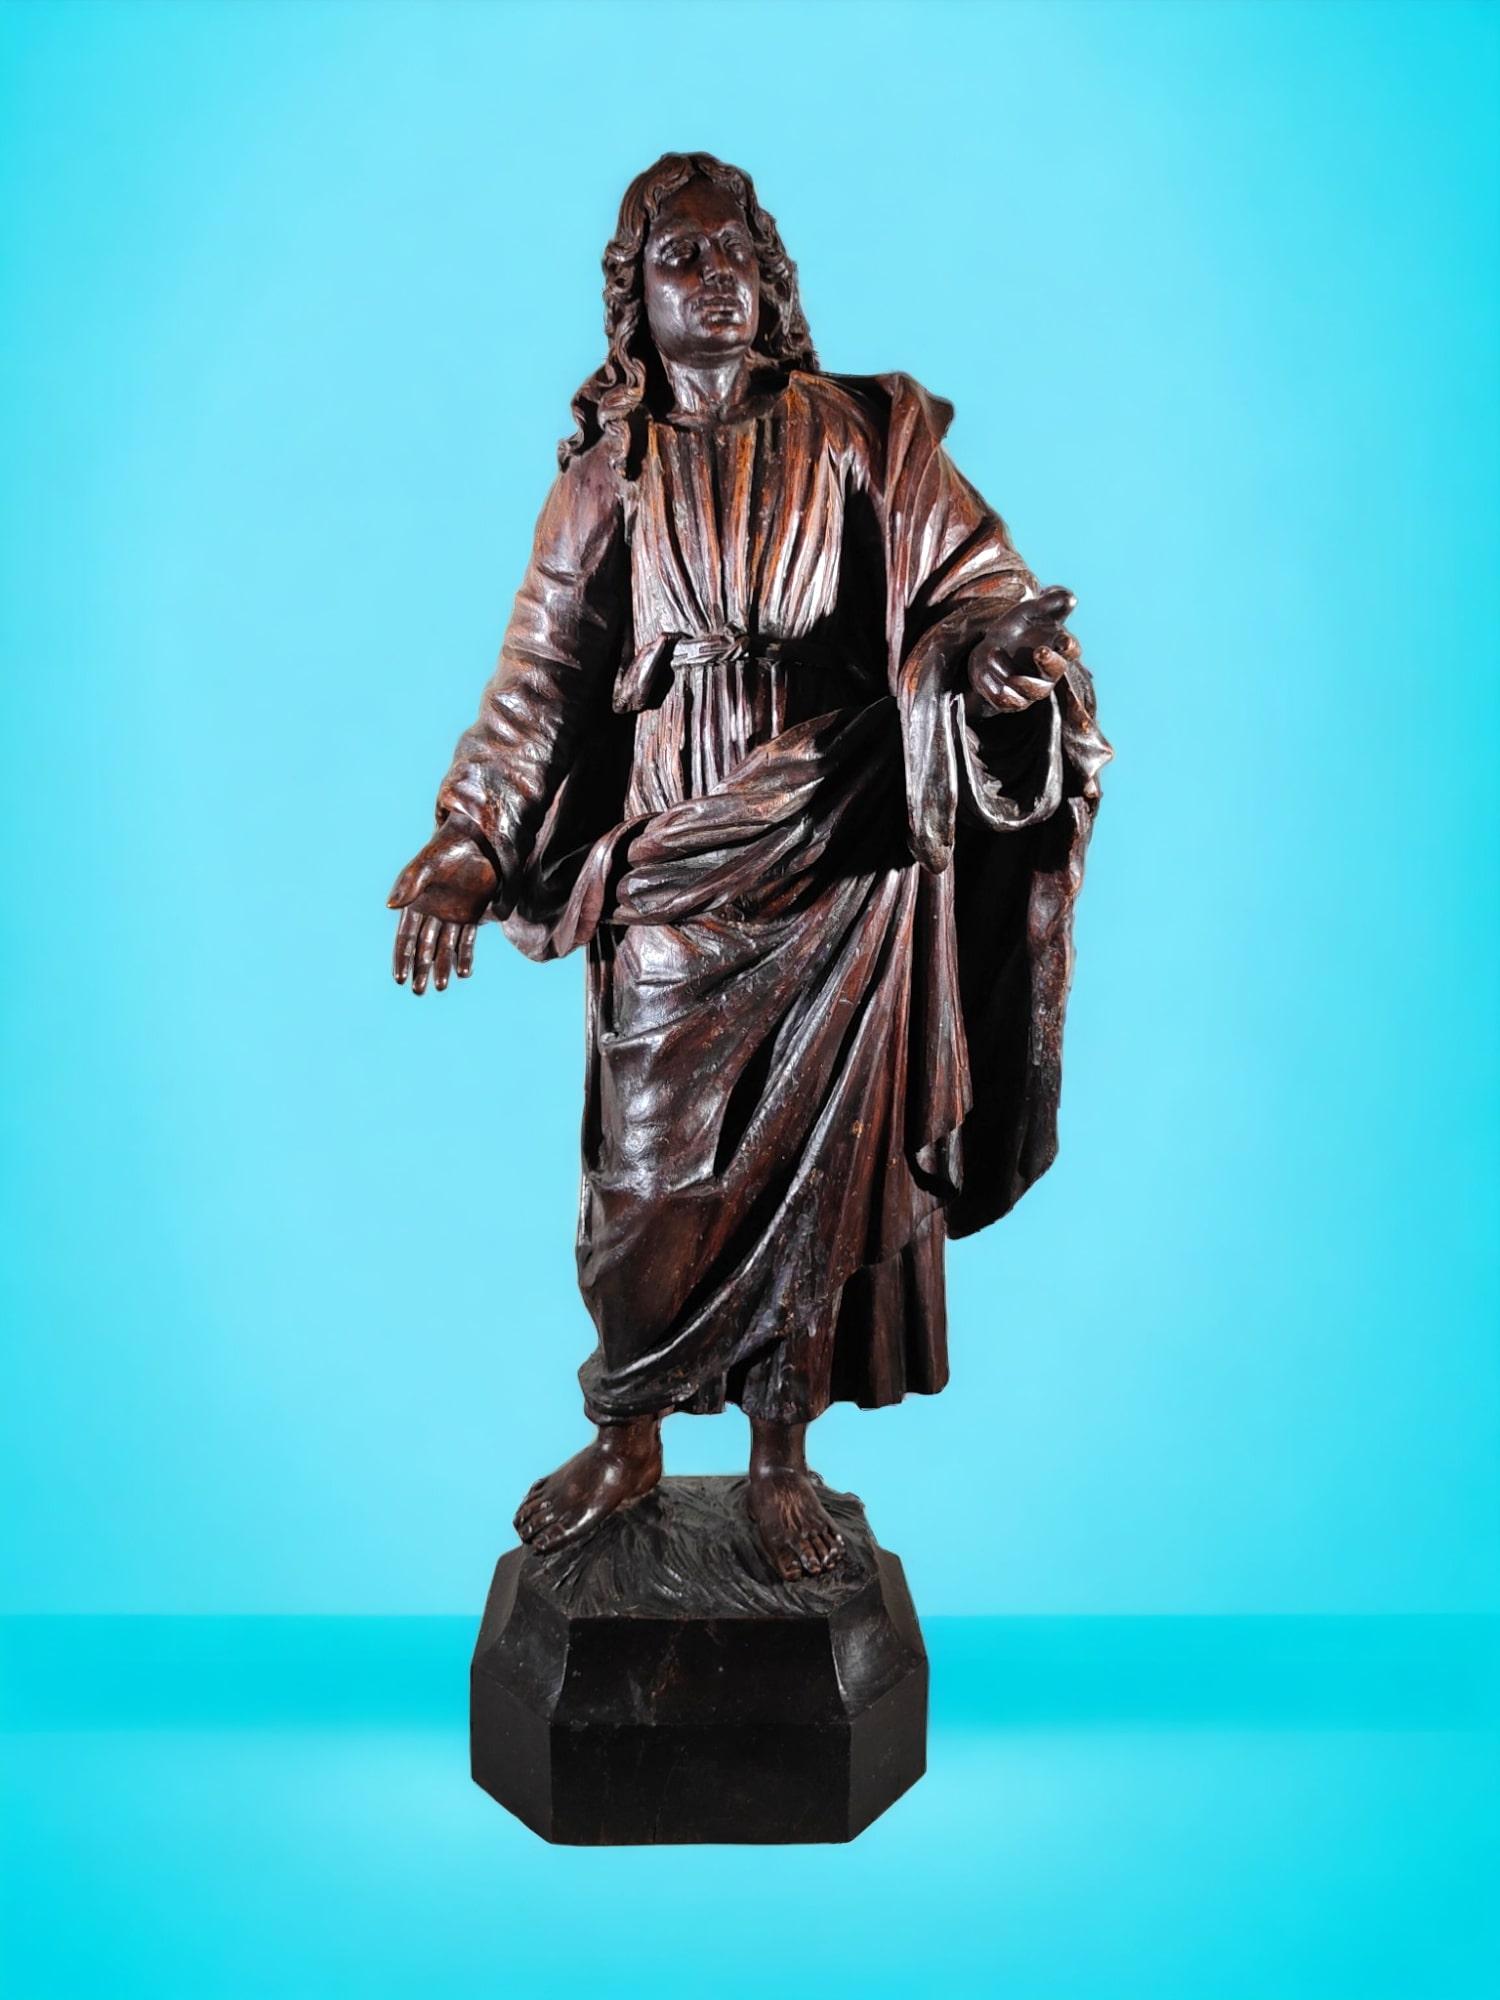 This important sculpture of the apostle Saint John, originating from Veneto, Italy, portrays one of Jesus' closest and most beloved disciples. Saint John, also known as 